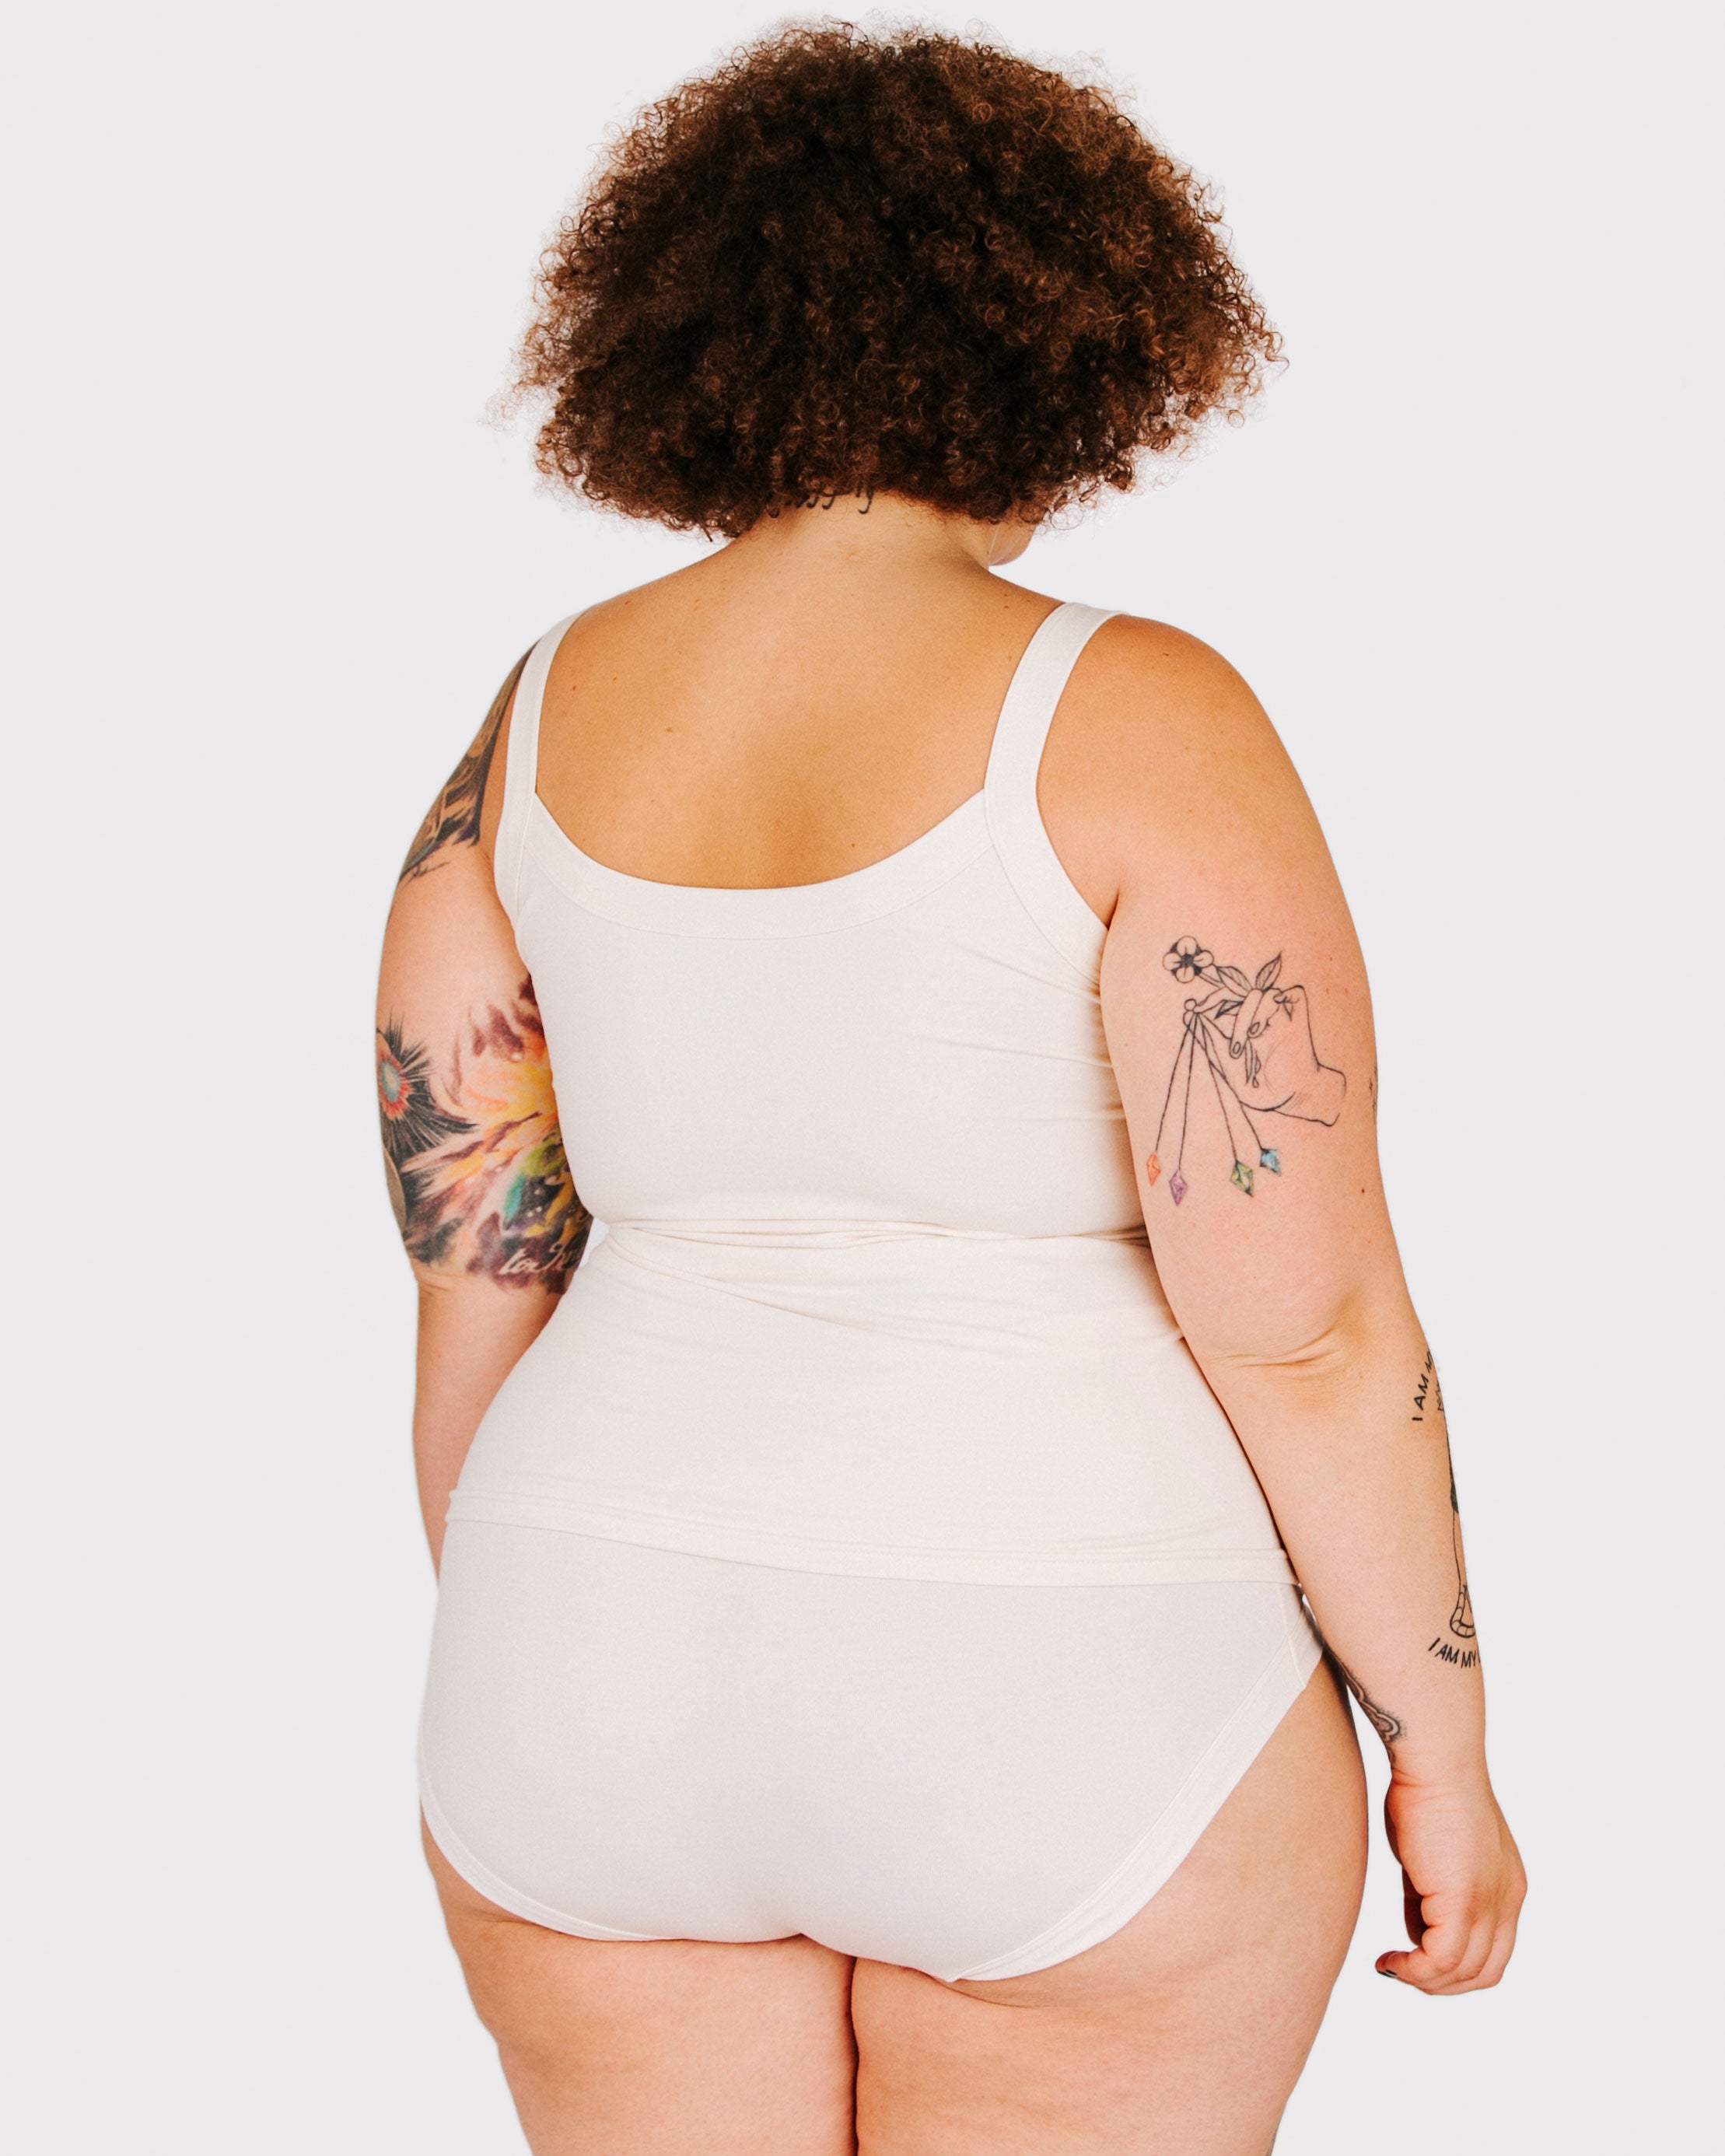 Fit photo from the back of Thunderpants organic cotton Camisole and Hipster style underwear in off-white, showing a wedge-free bum, on a model..